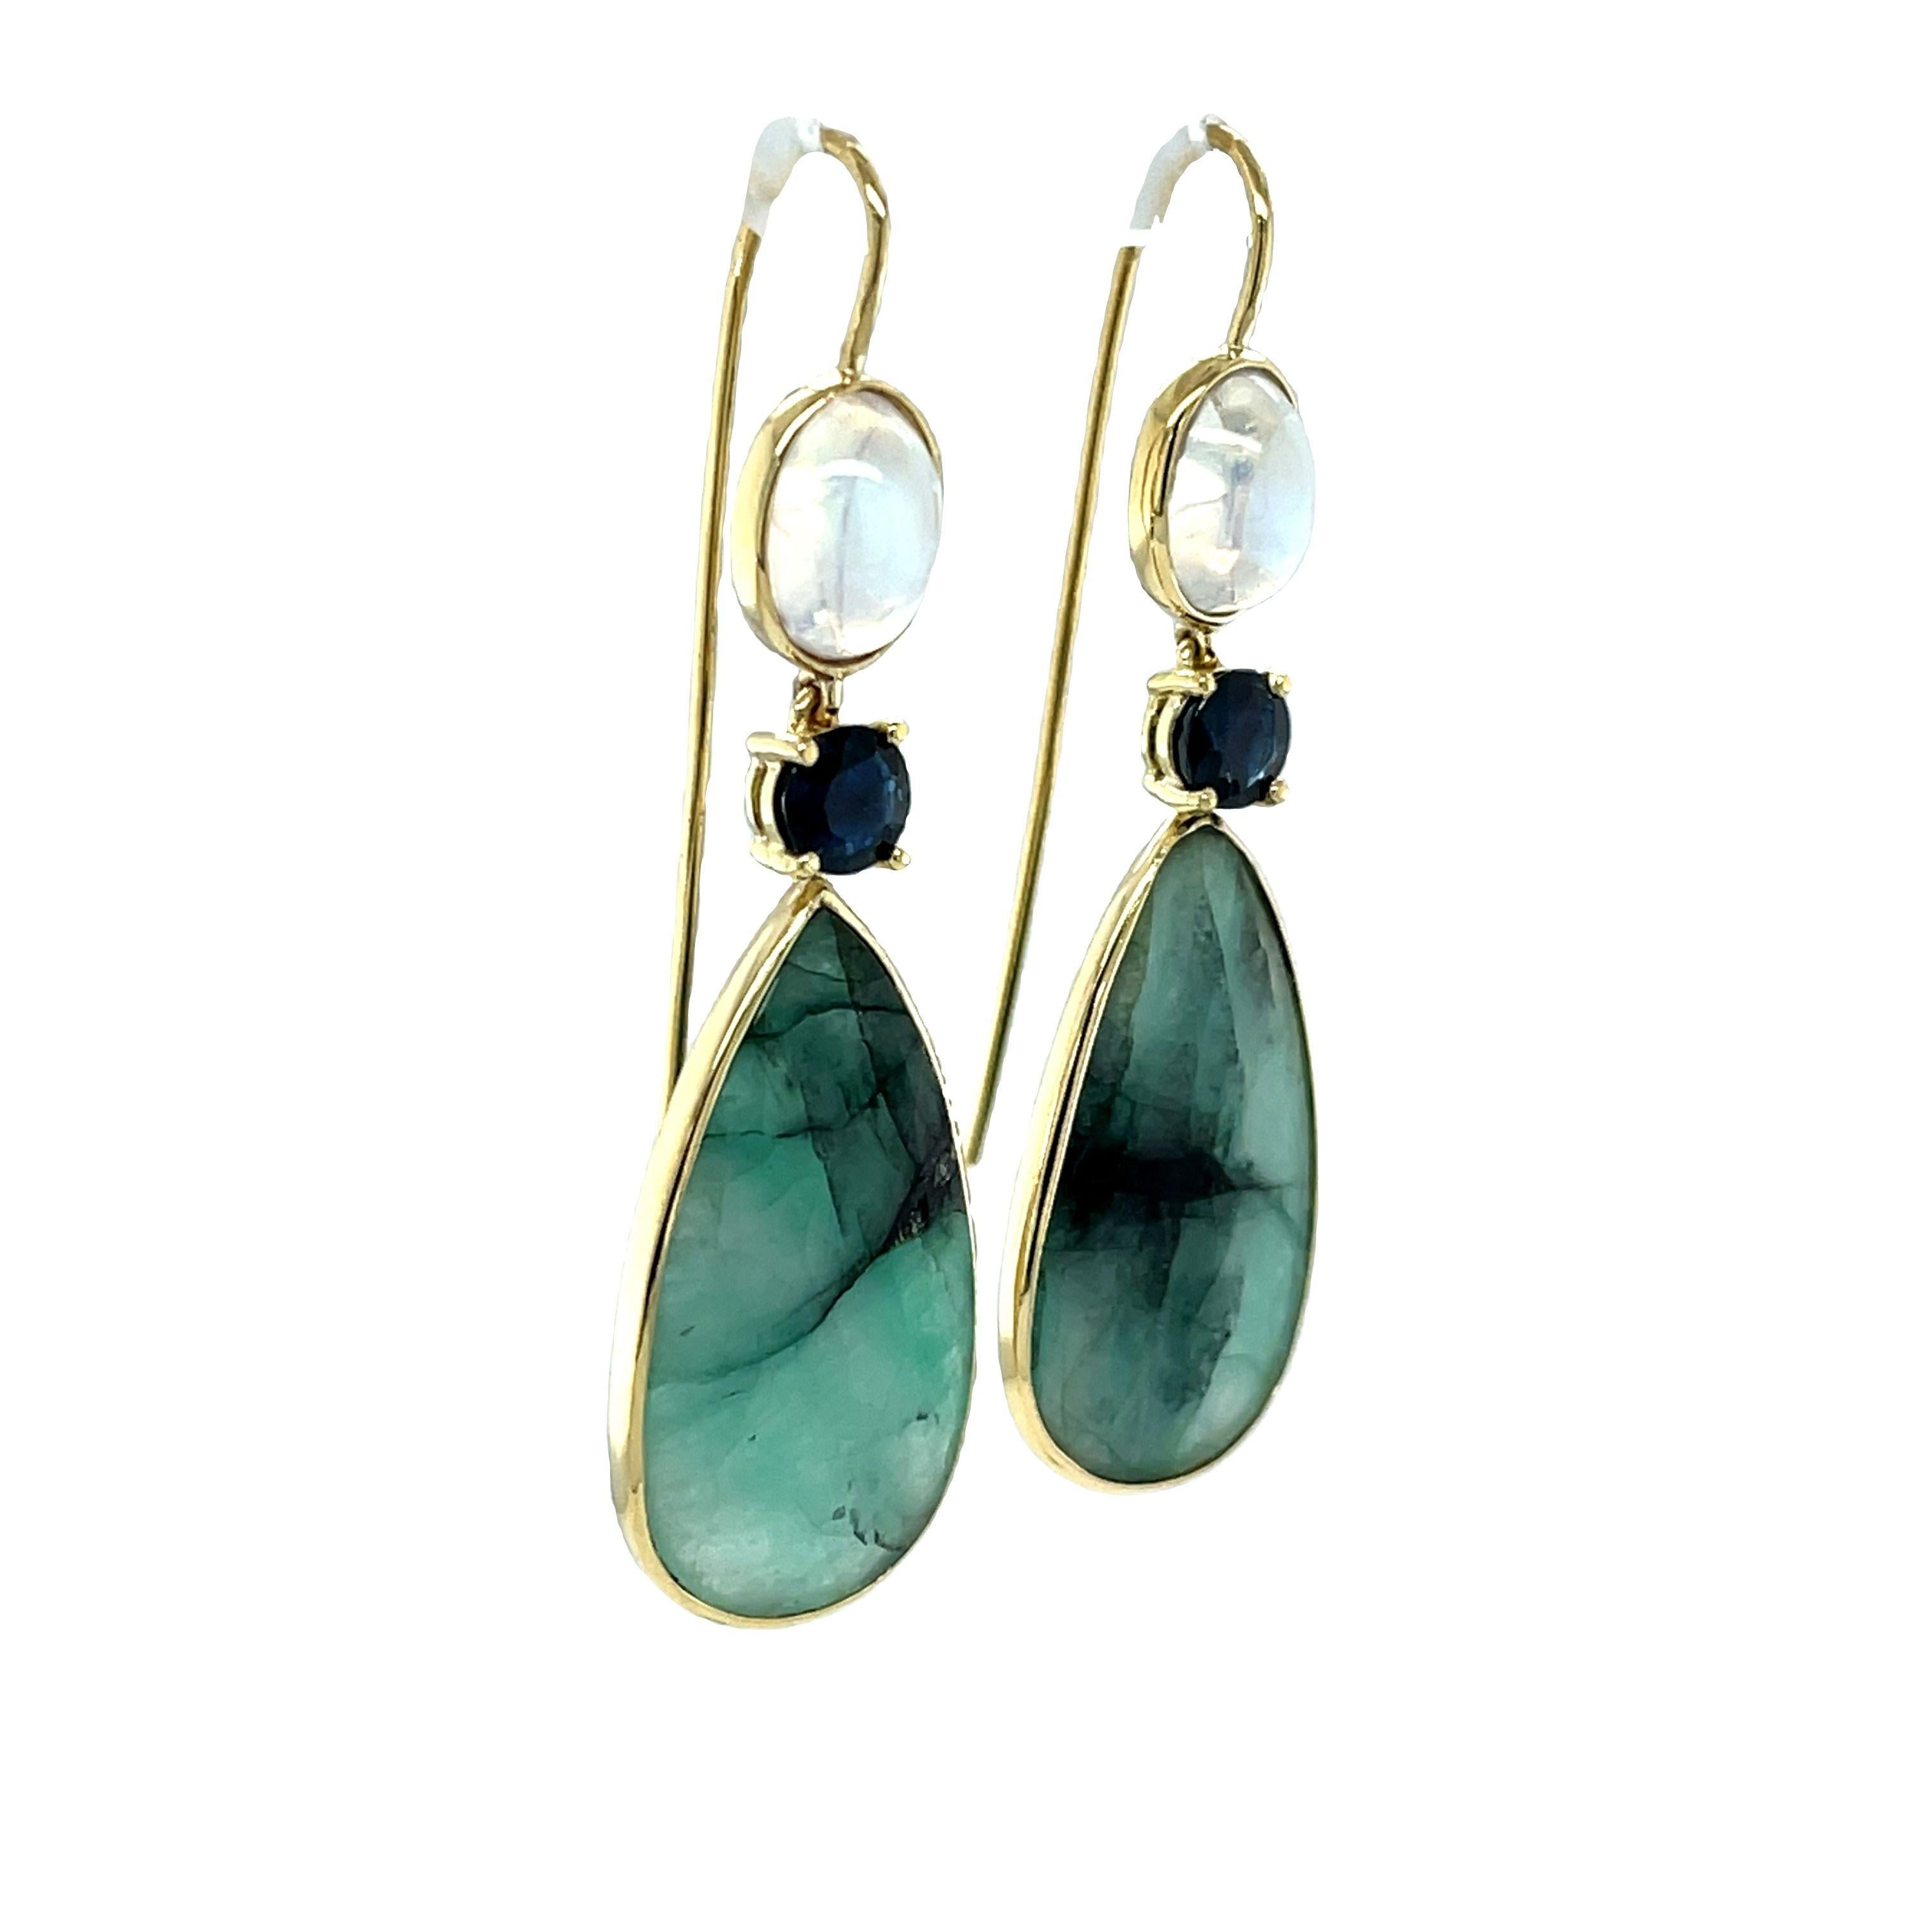 These dramatic 18k yellow gold drop earrings feature a striking combination of colors, shapes and textures! Two pear-shaped varigated emerald 